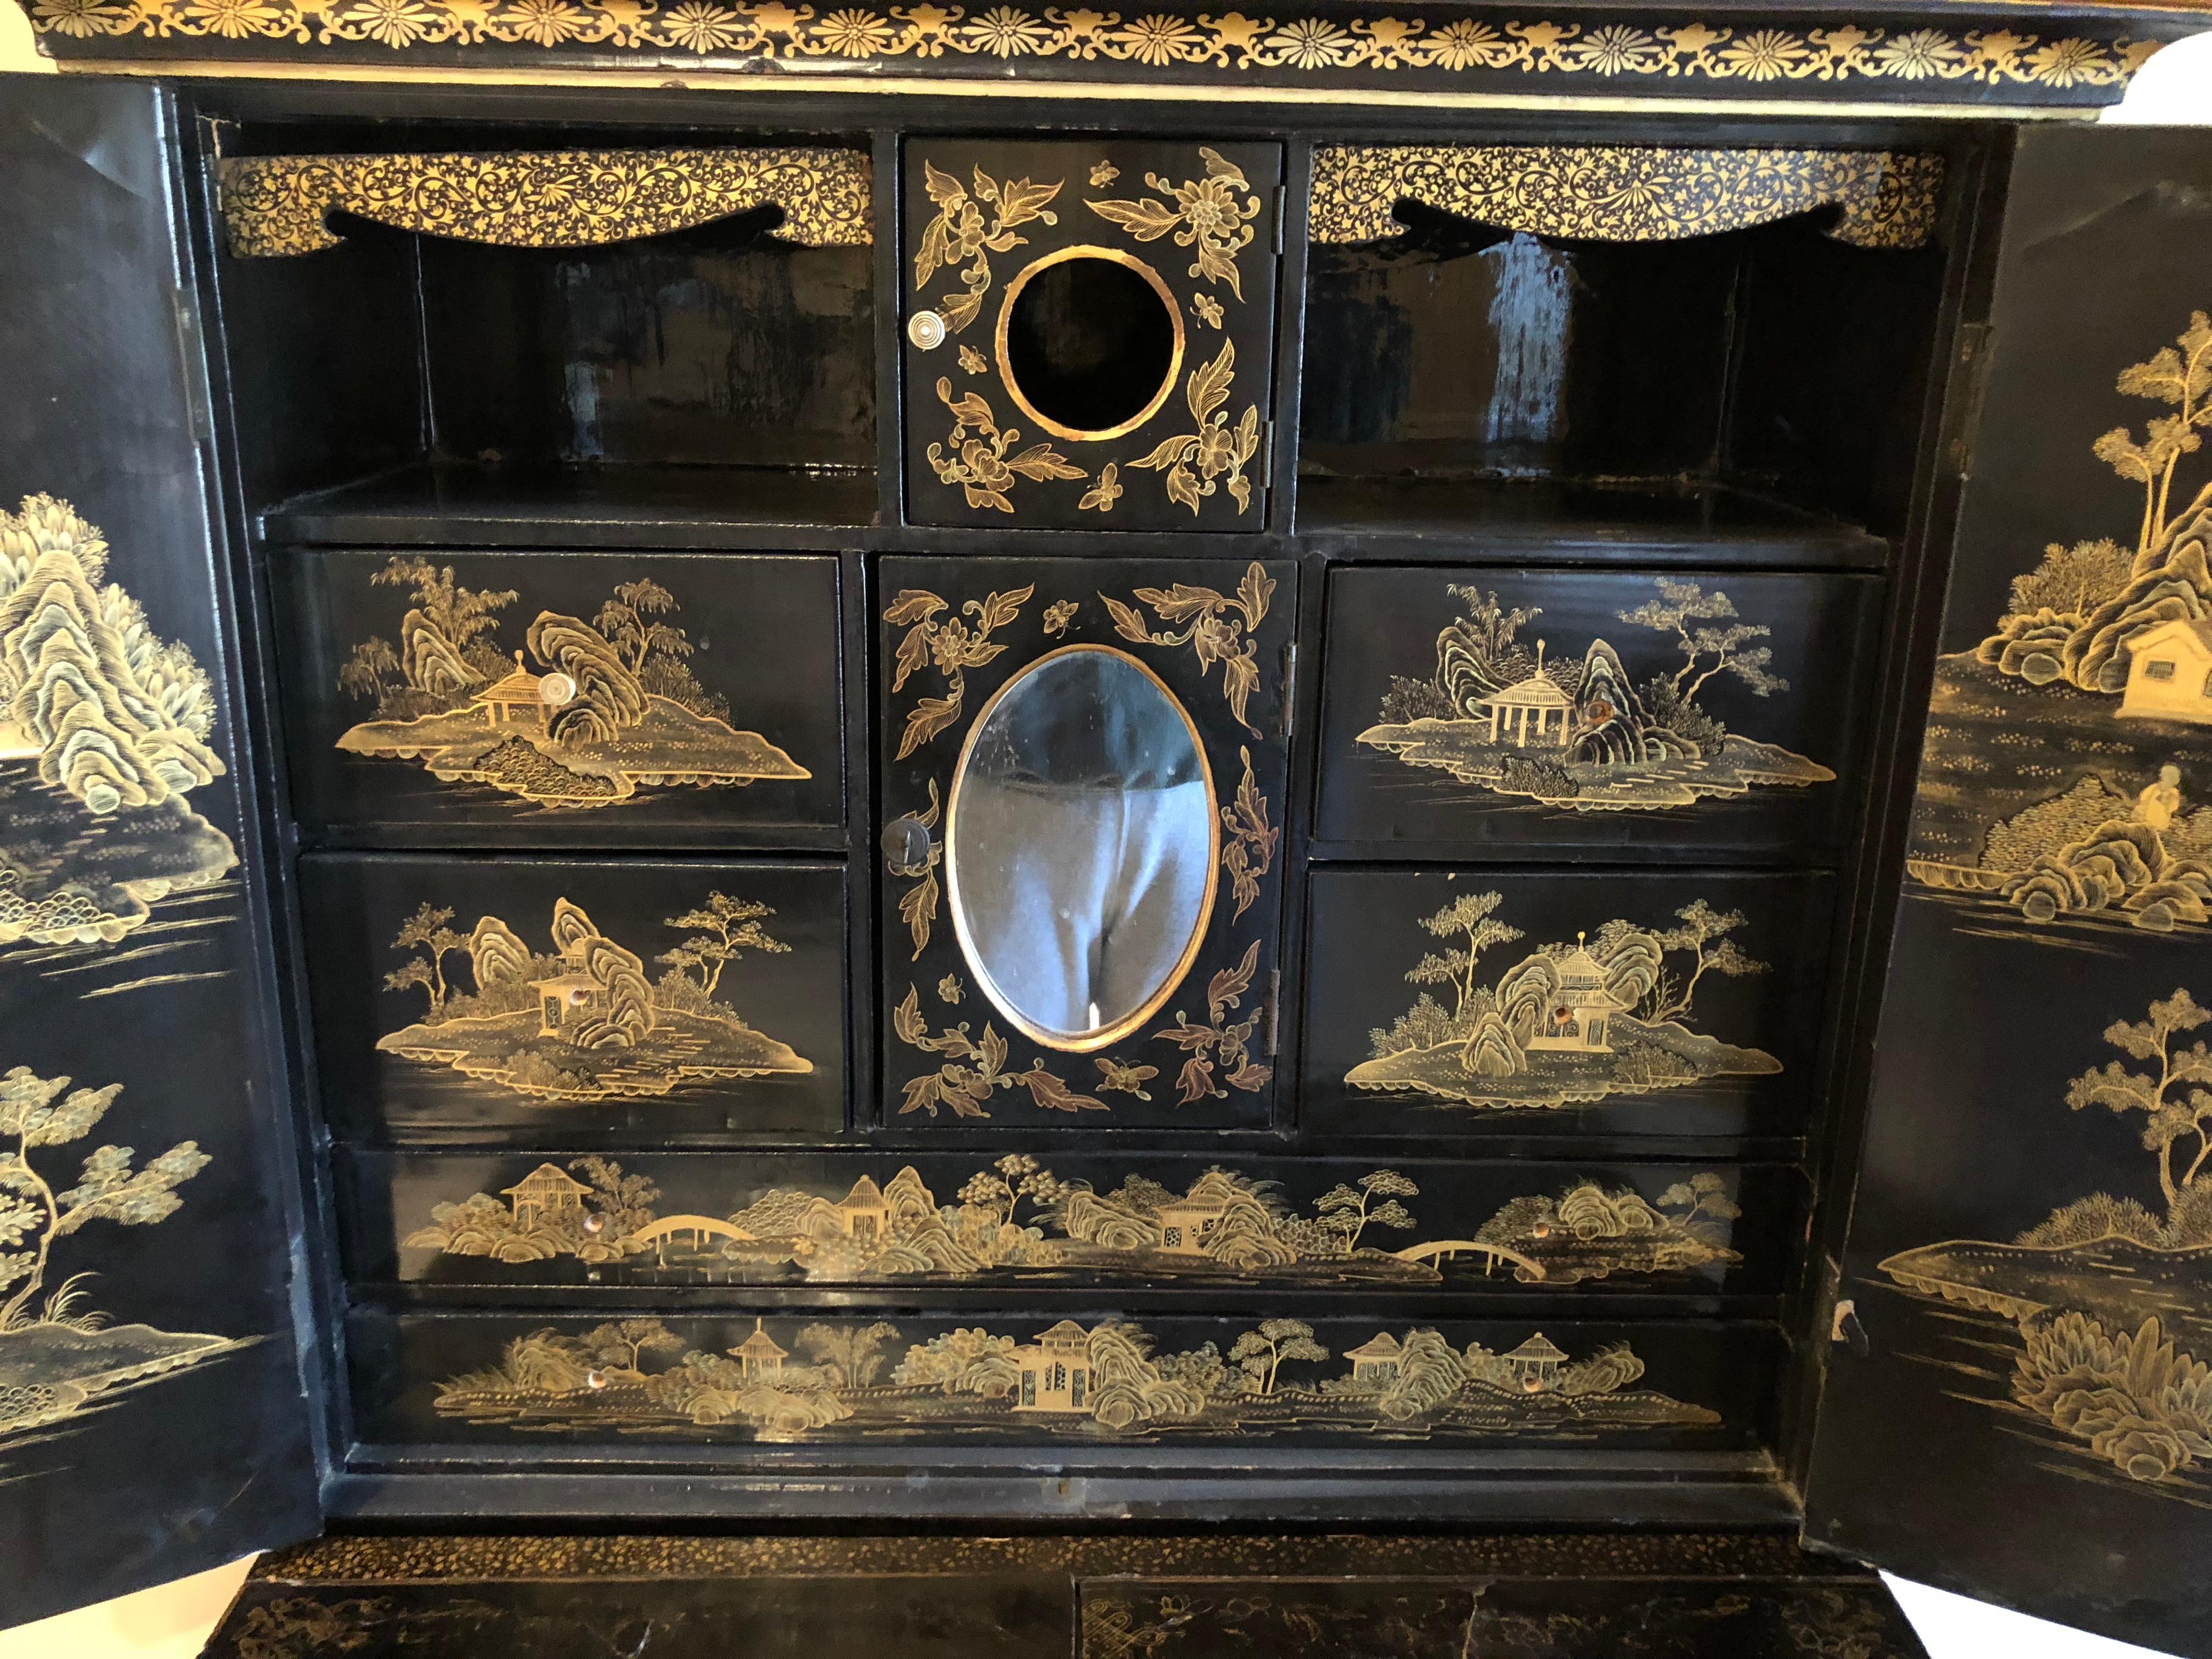 Chinoiserie Exquisite Antique Chinese Export Gilt Decorated Black Lacquer Cabinet on Stand